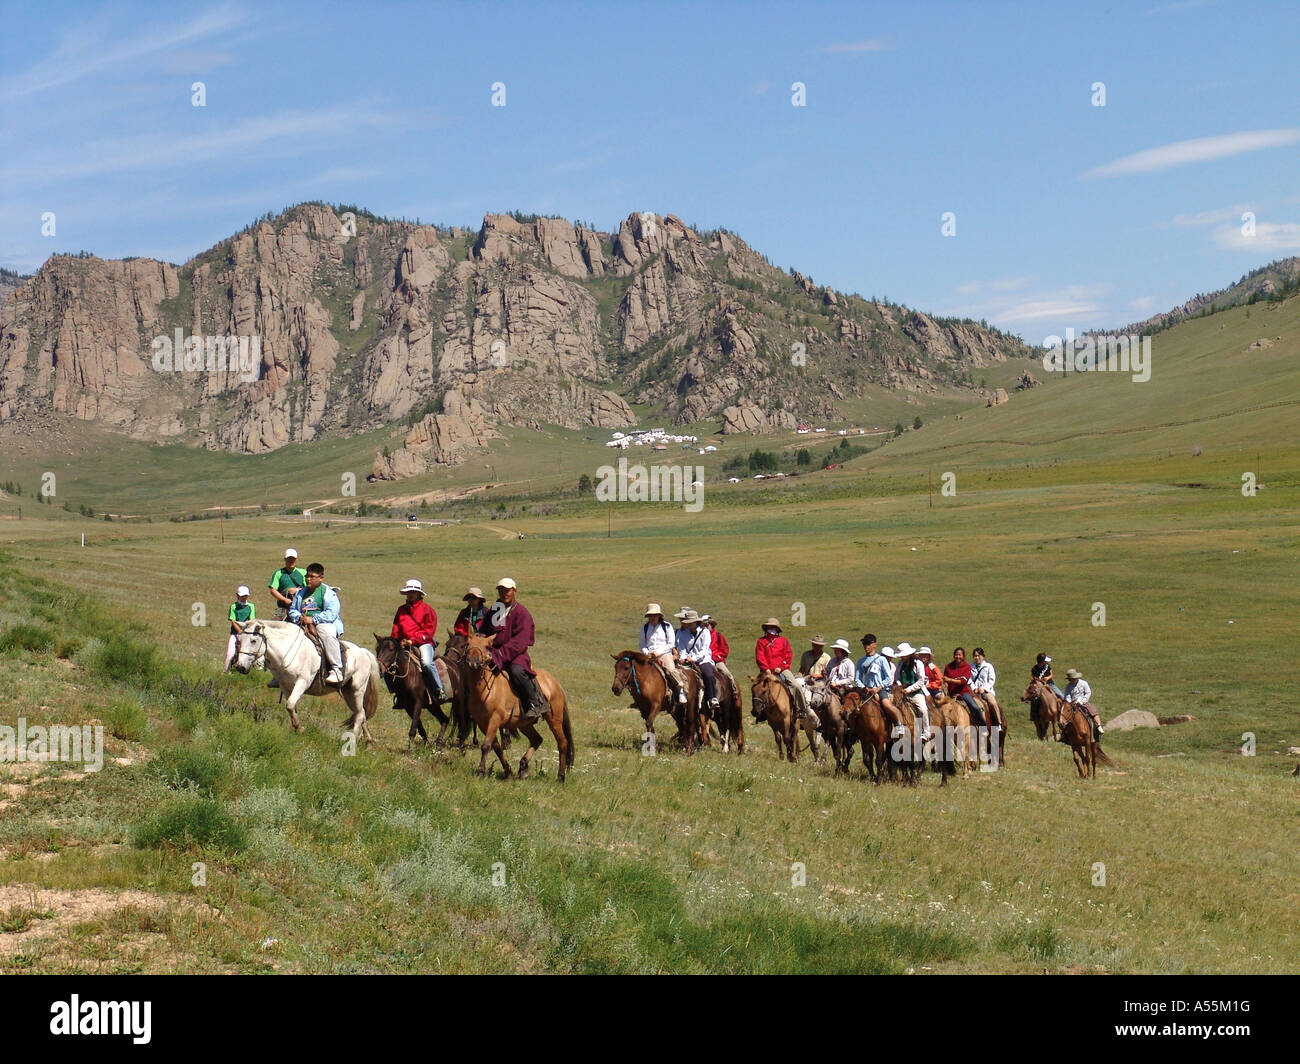 Painet is1455 mongolia korean tourists horseback ulaan baatar country developing nation less economically developed culture Stock Photo